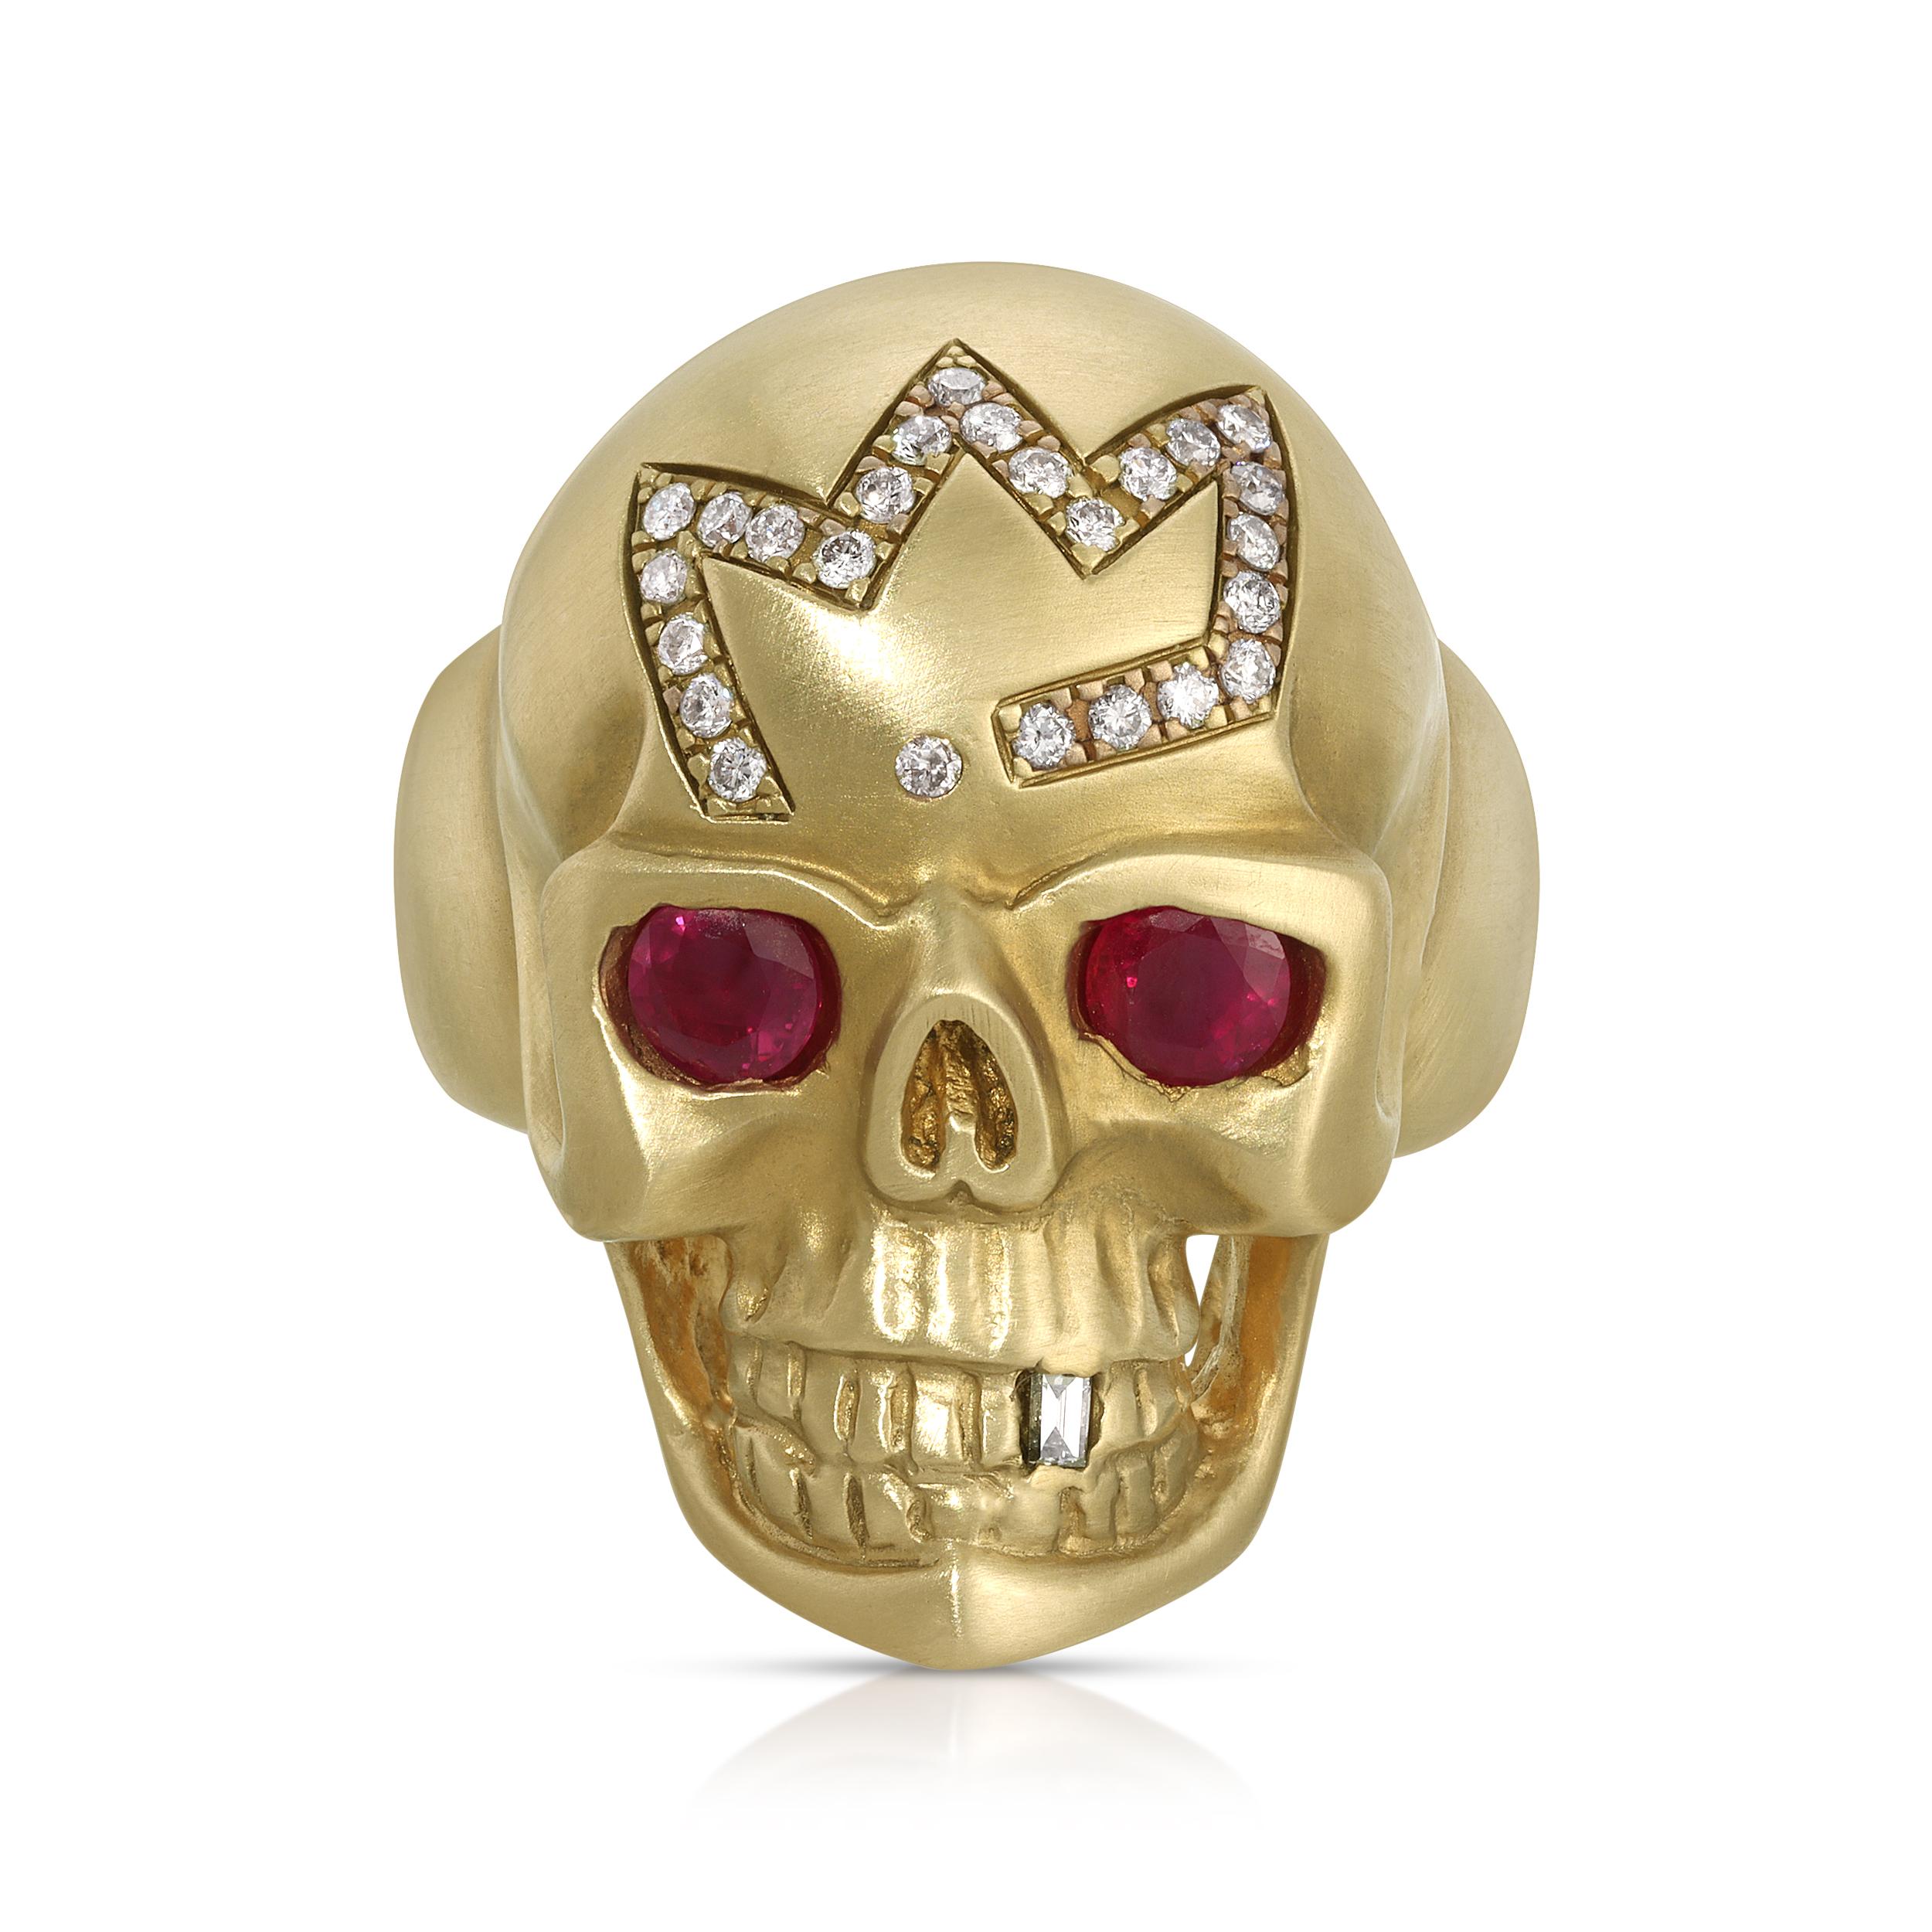 14k yellow gold, hand carved large skull ring, with ruby eyes, diamond crown, and tooth

31 grams of 14k yellow gold with ruby eyes, a pave diamond crown, a baguette diamond tooth, and a small accent diamond hidden inside the band.